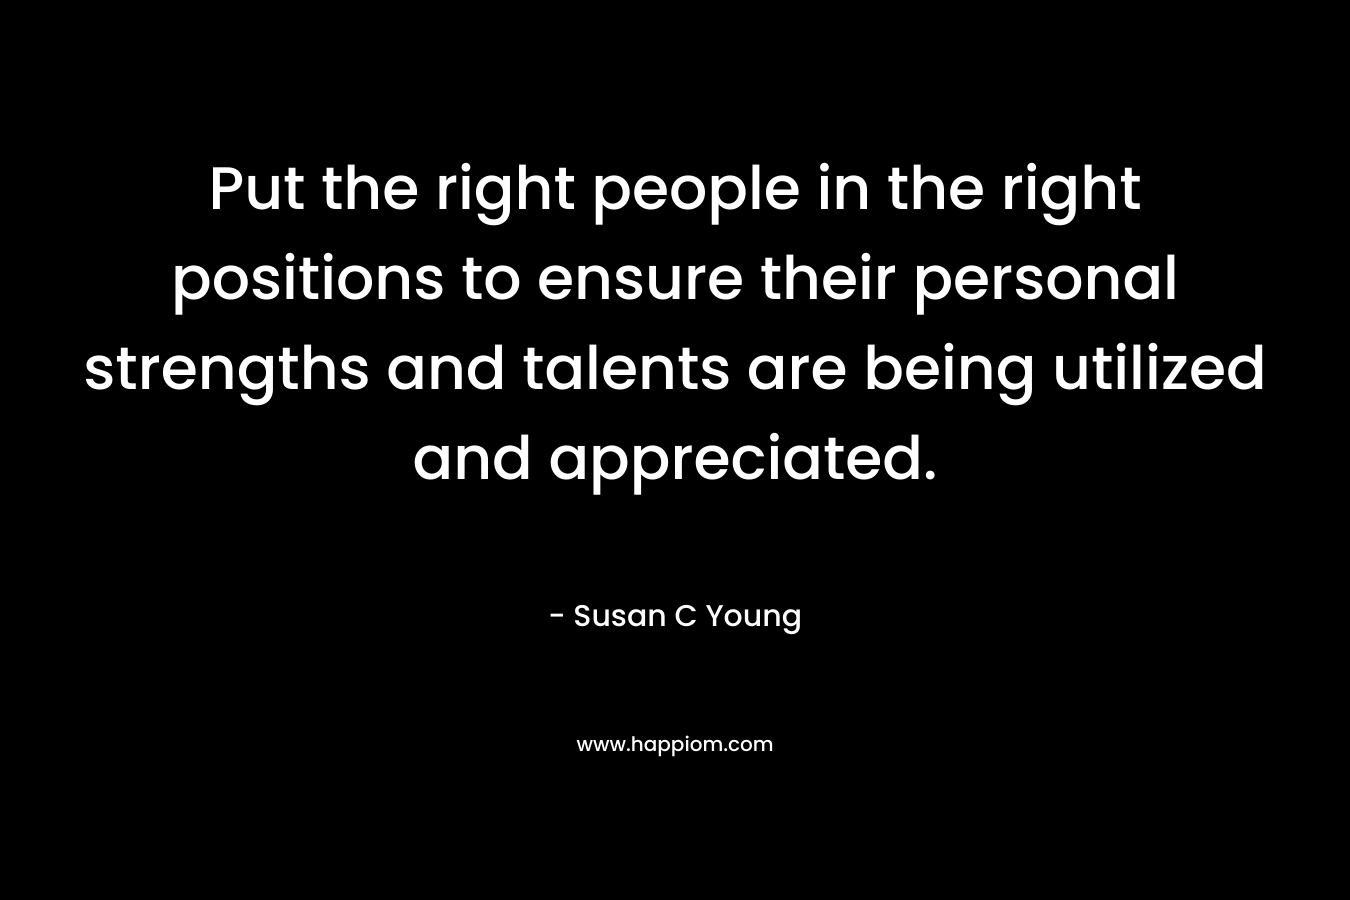 Put the right people in the right positions to ensure their personal strengths and talents are being utilized and appreciated.